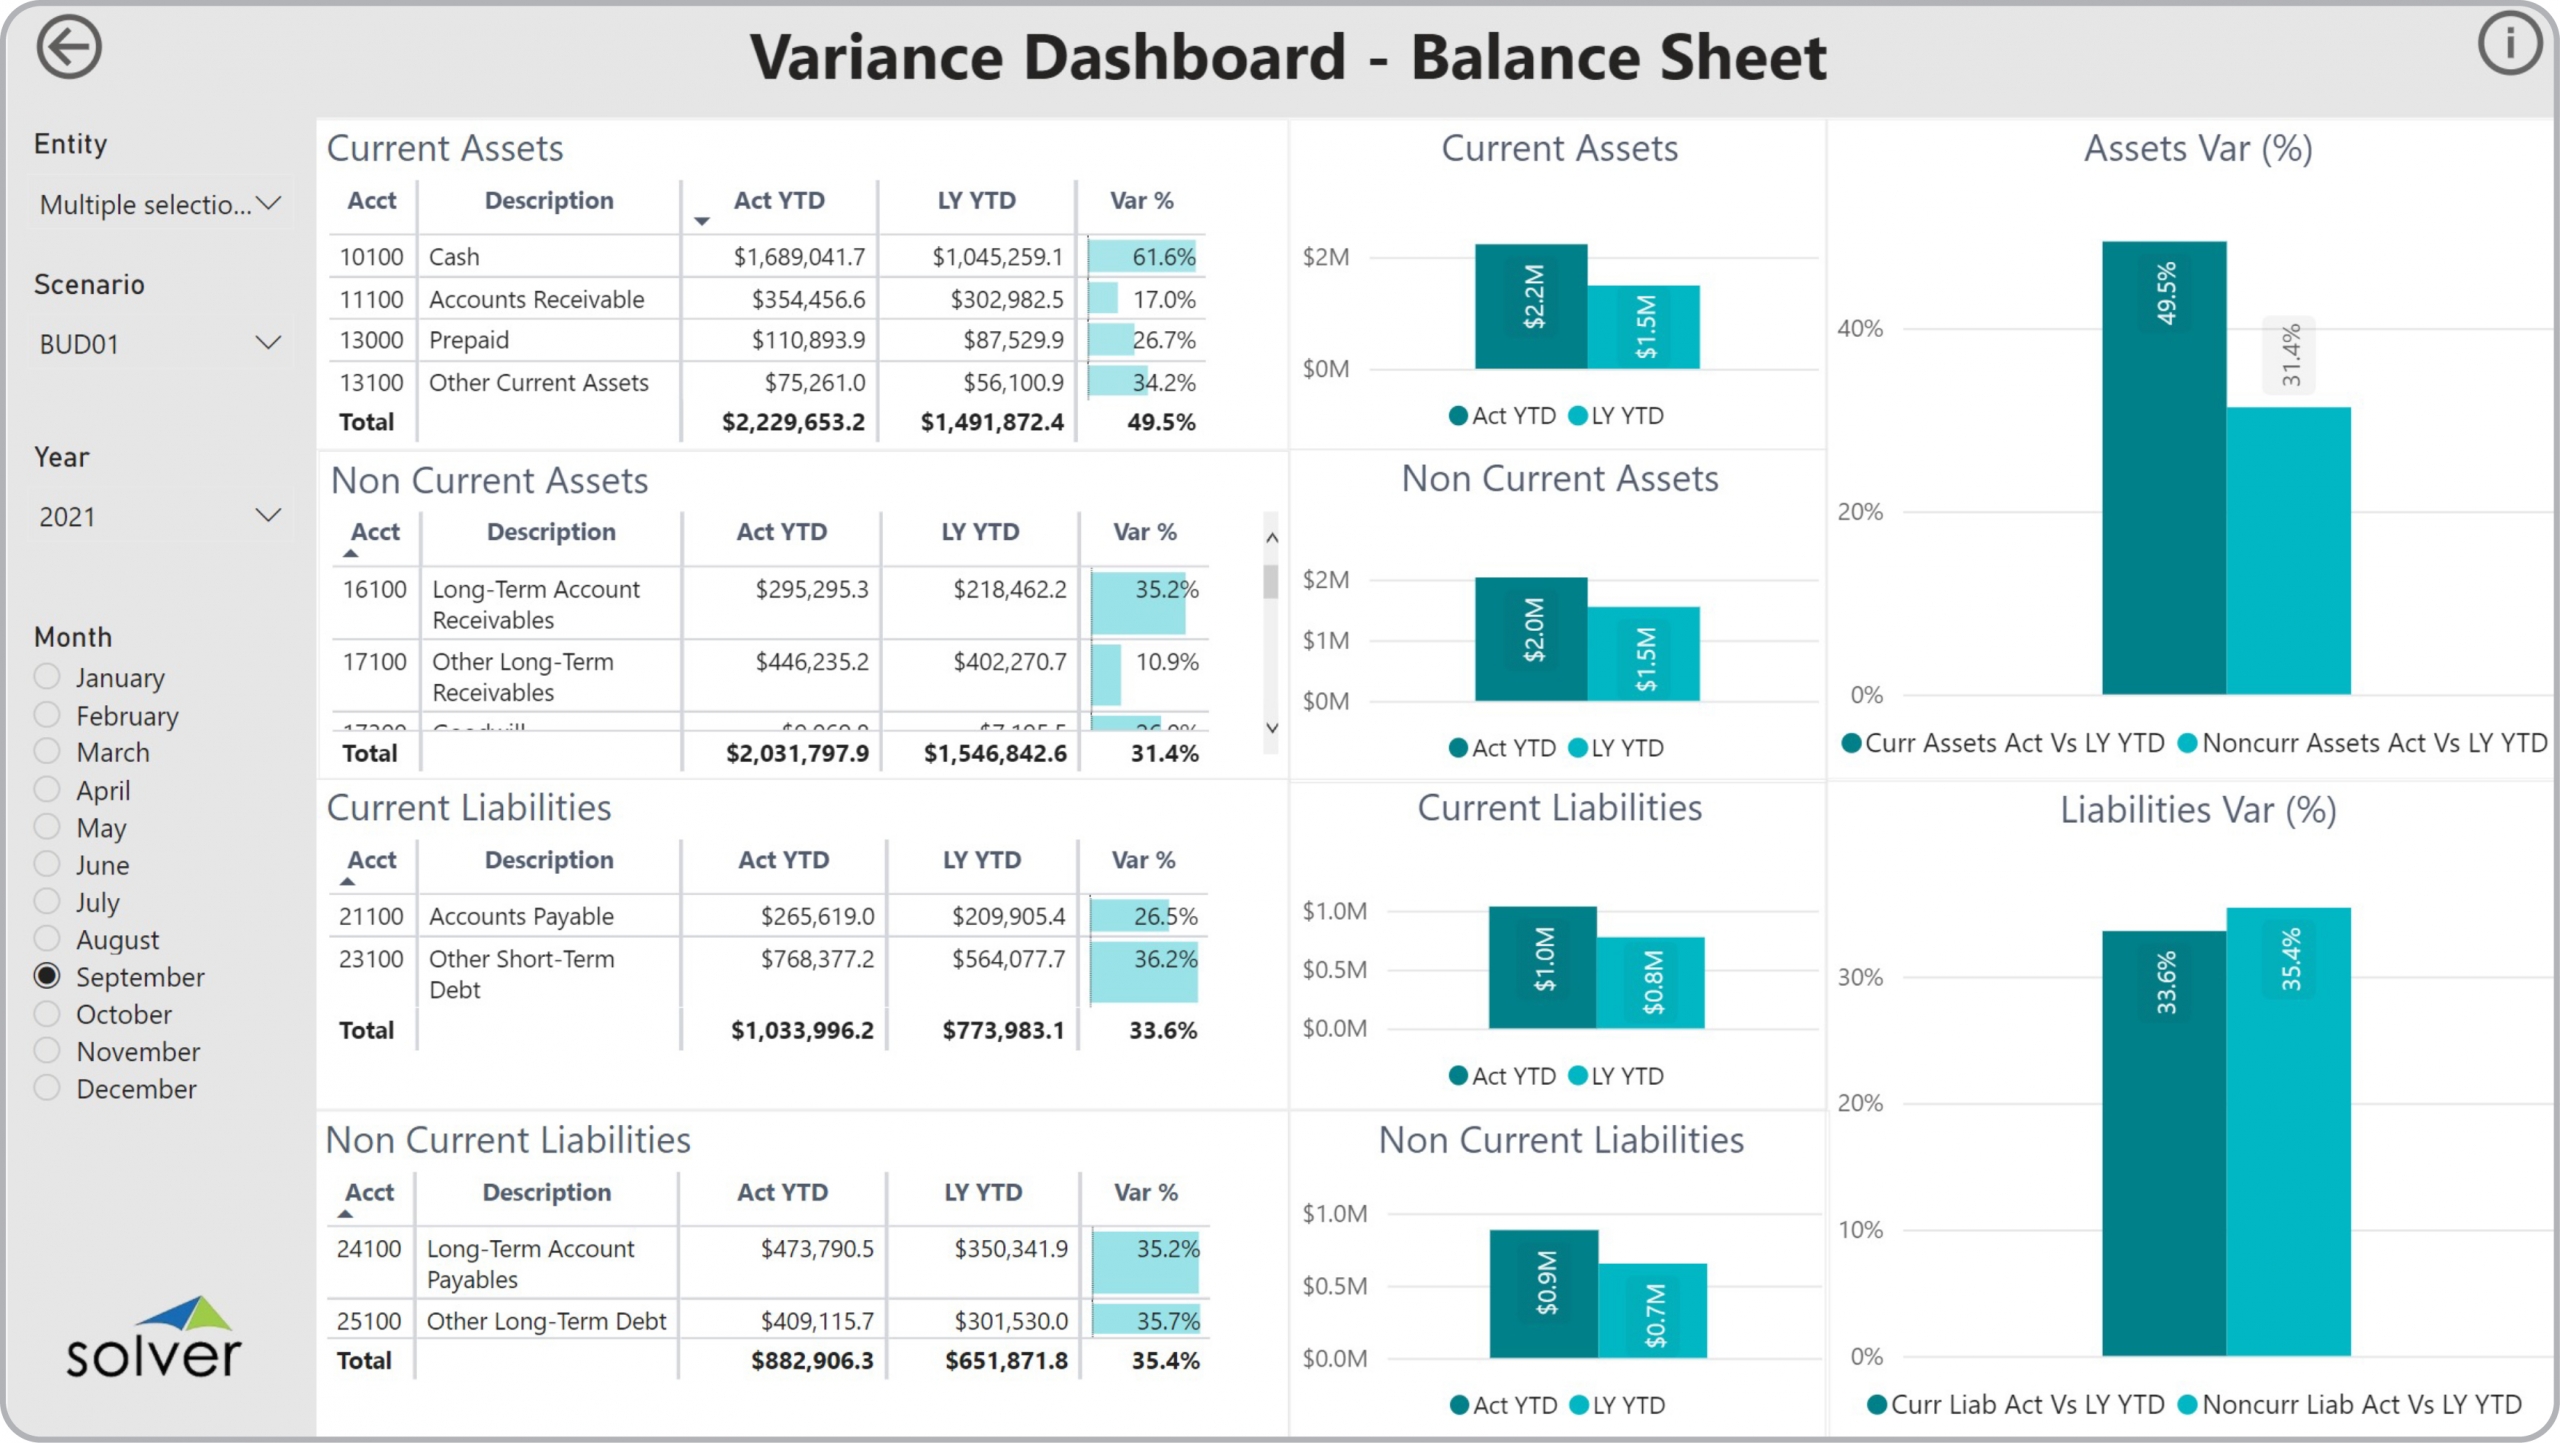 Example of an Balance Sheet Variance Dashboard to Streamline the Monthly Analysis Process